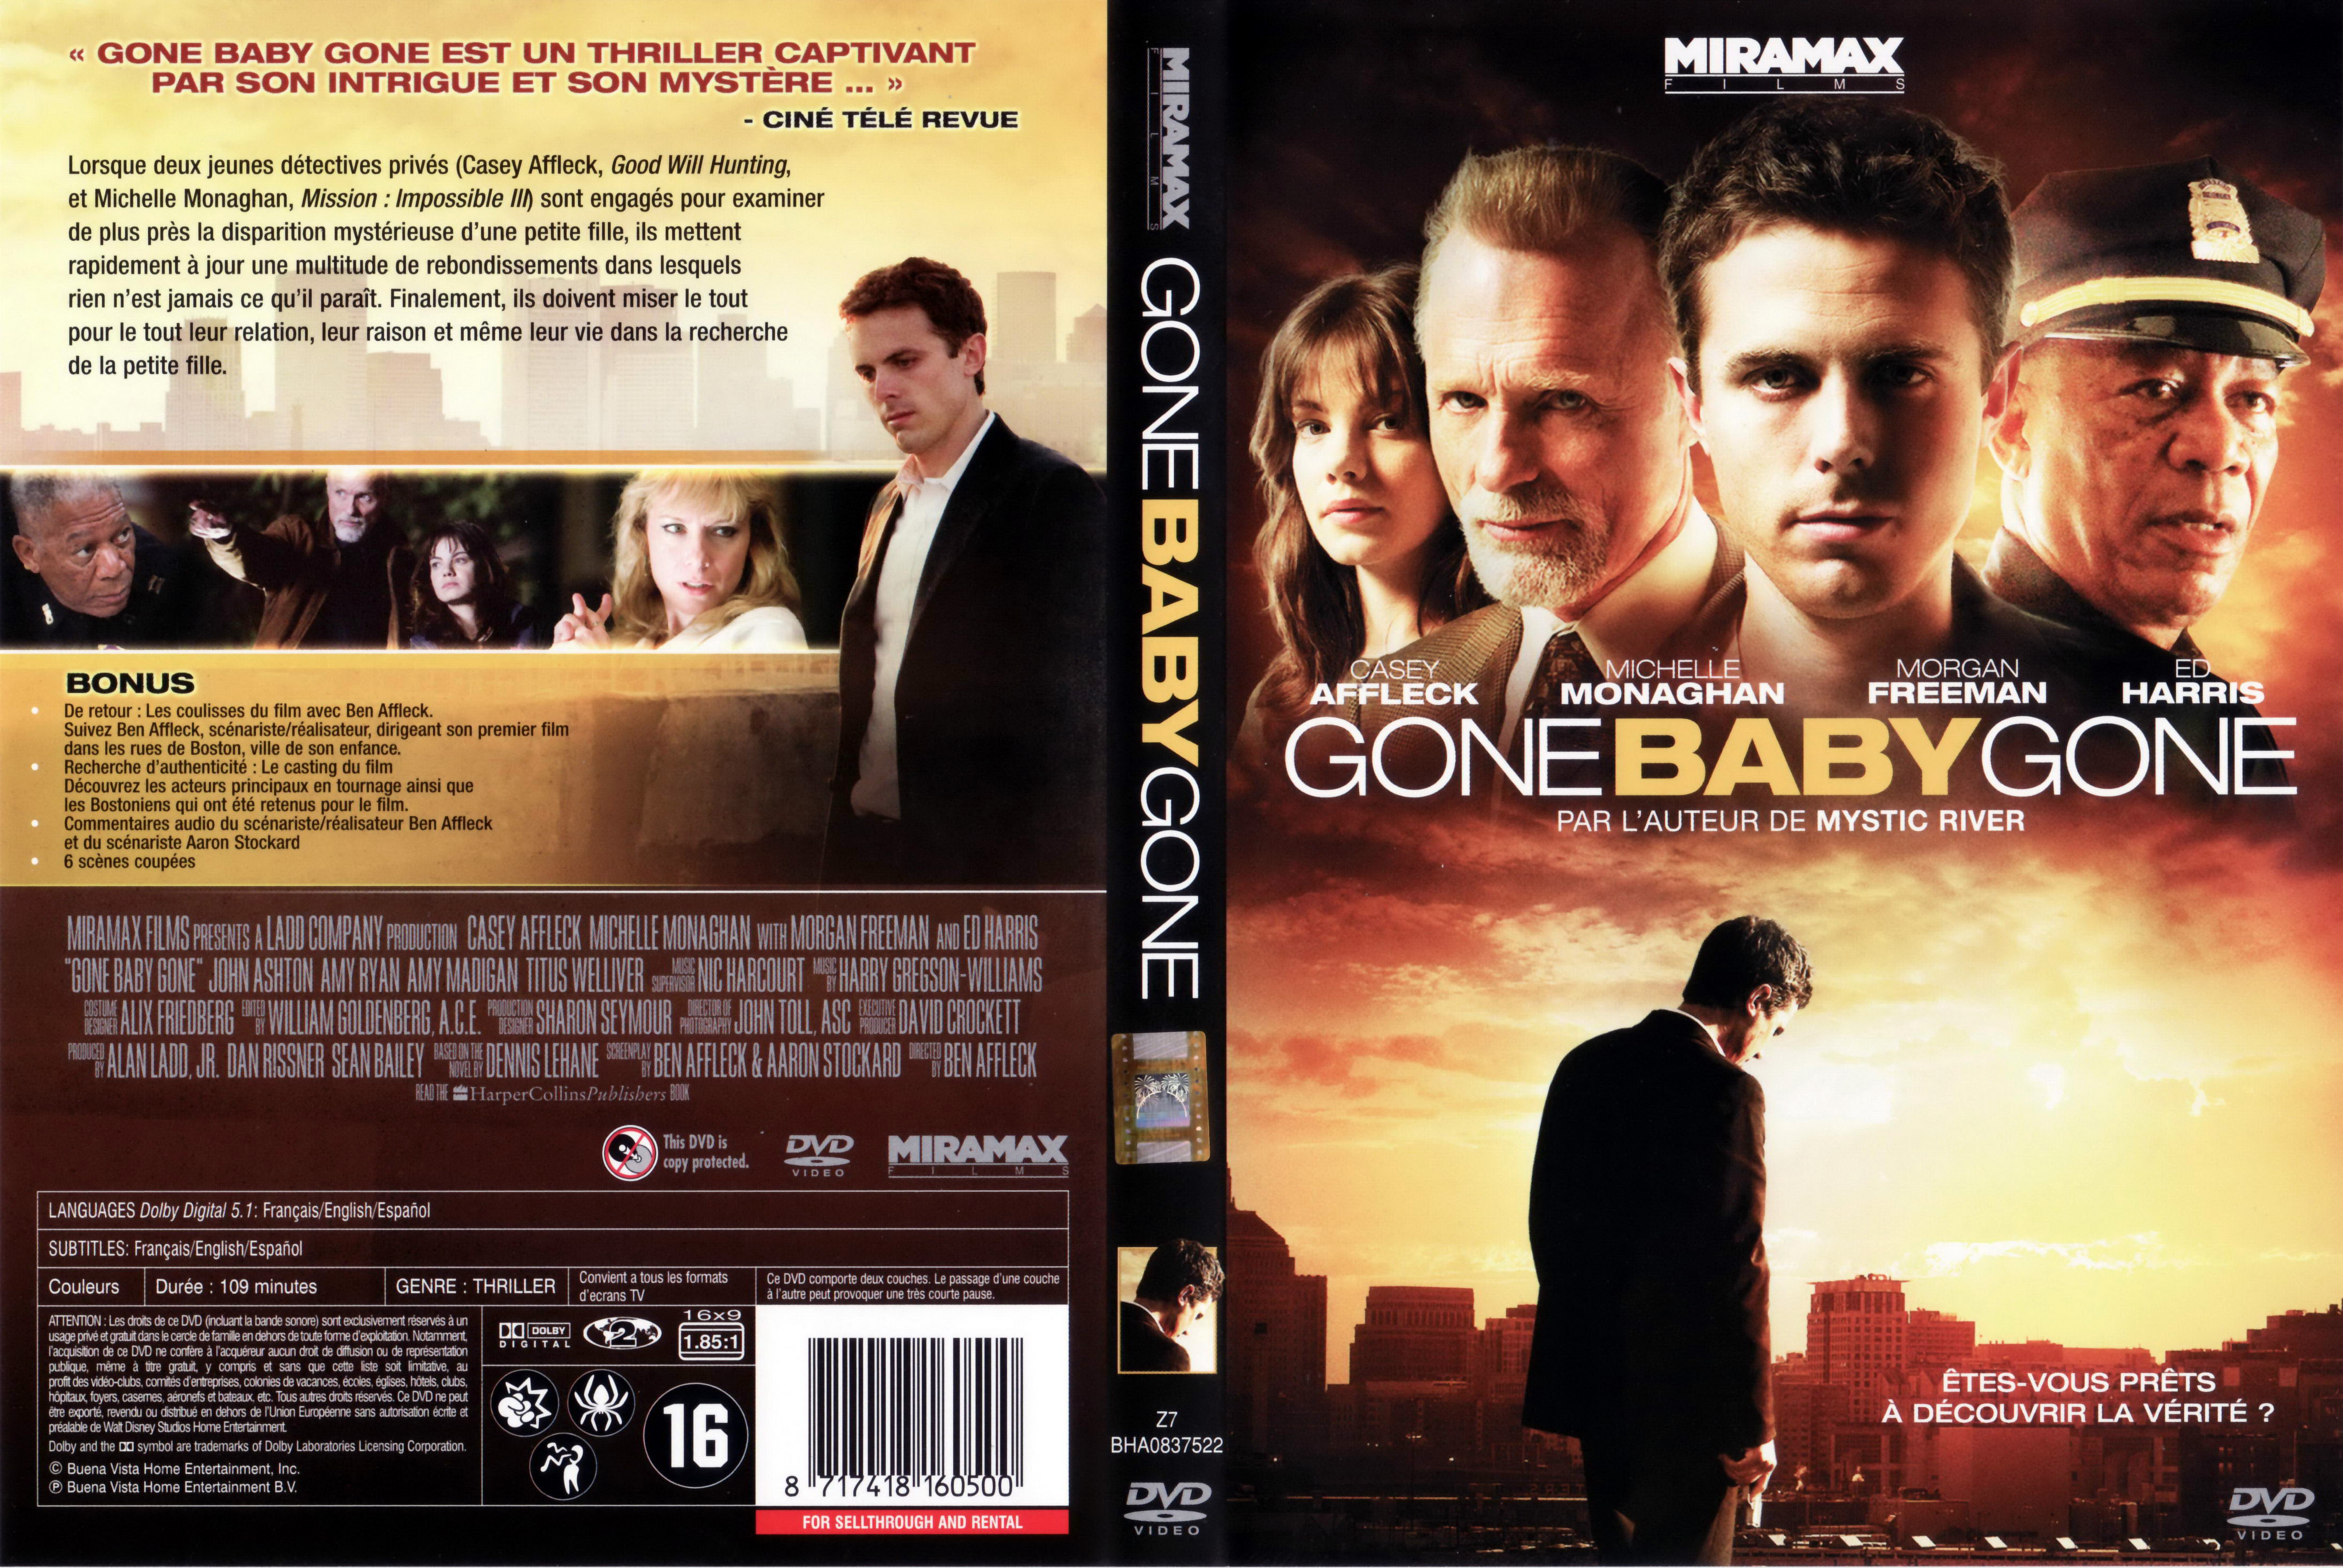 Jaquette DVD Gone baby gone